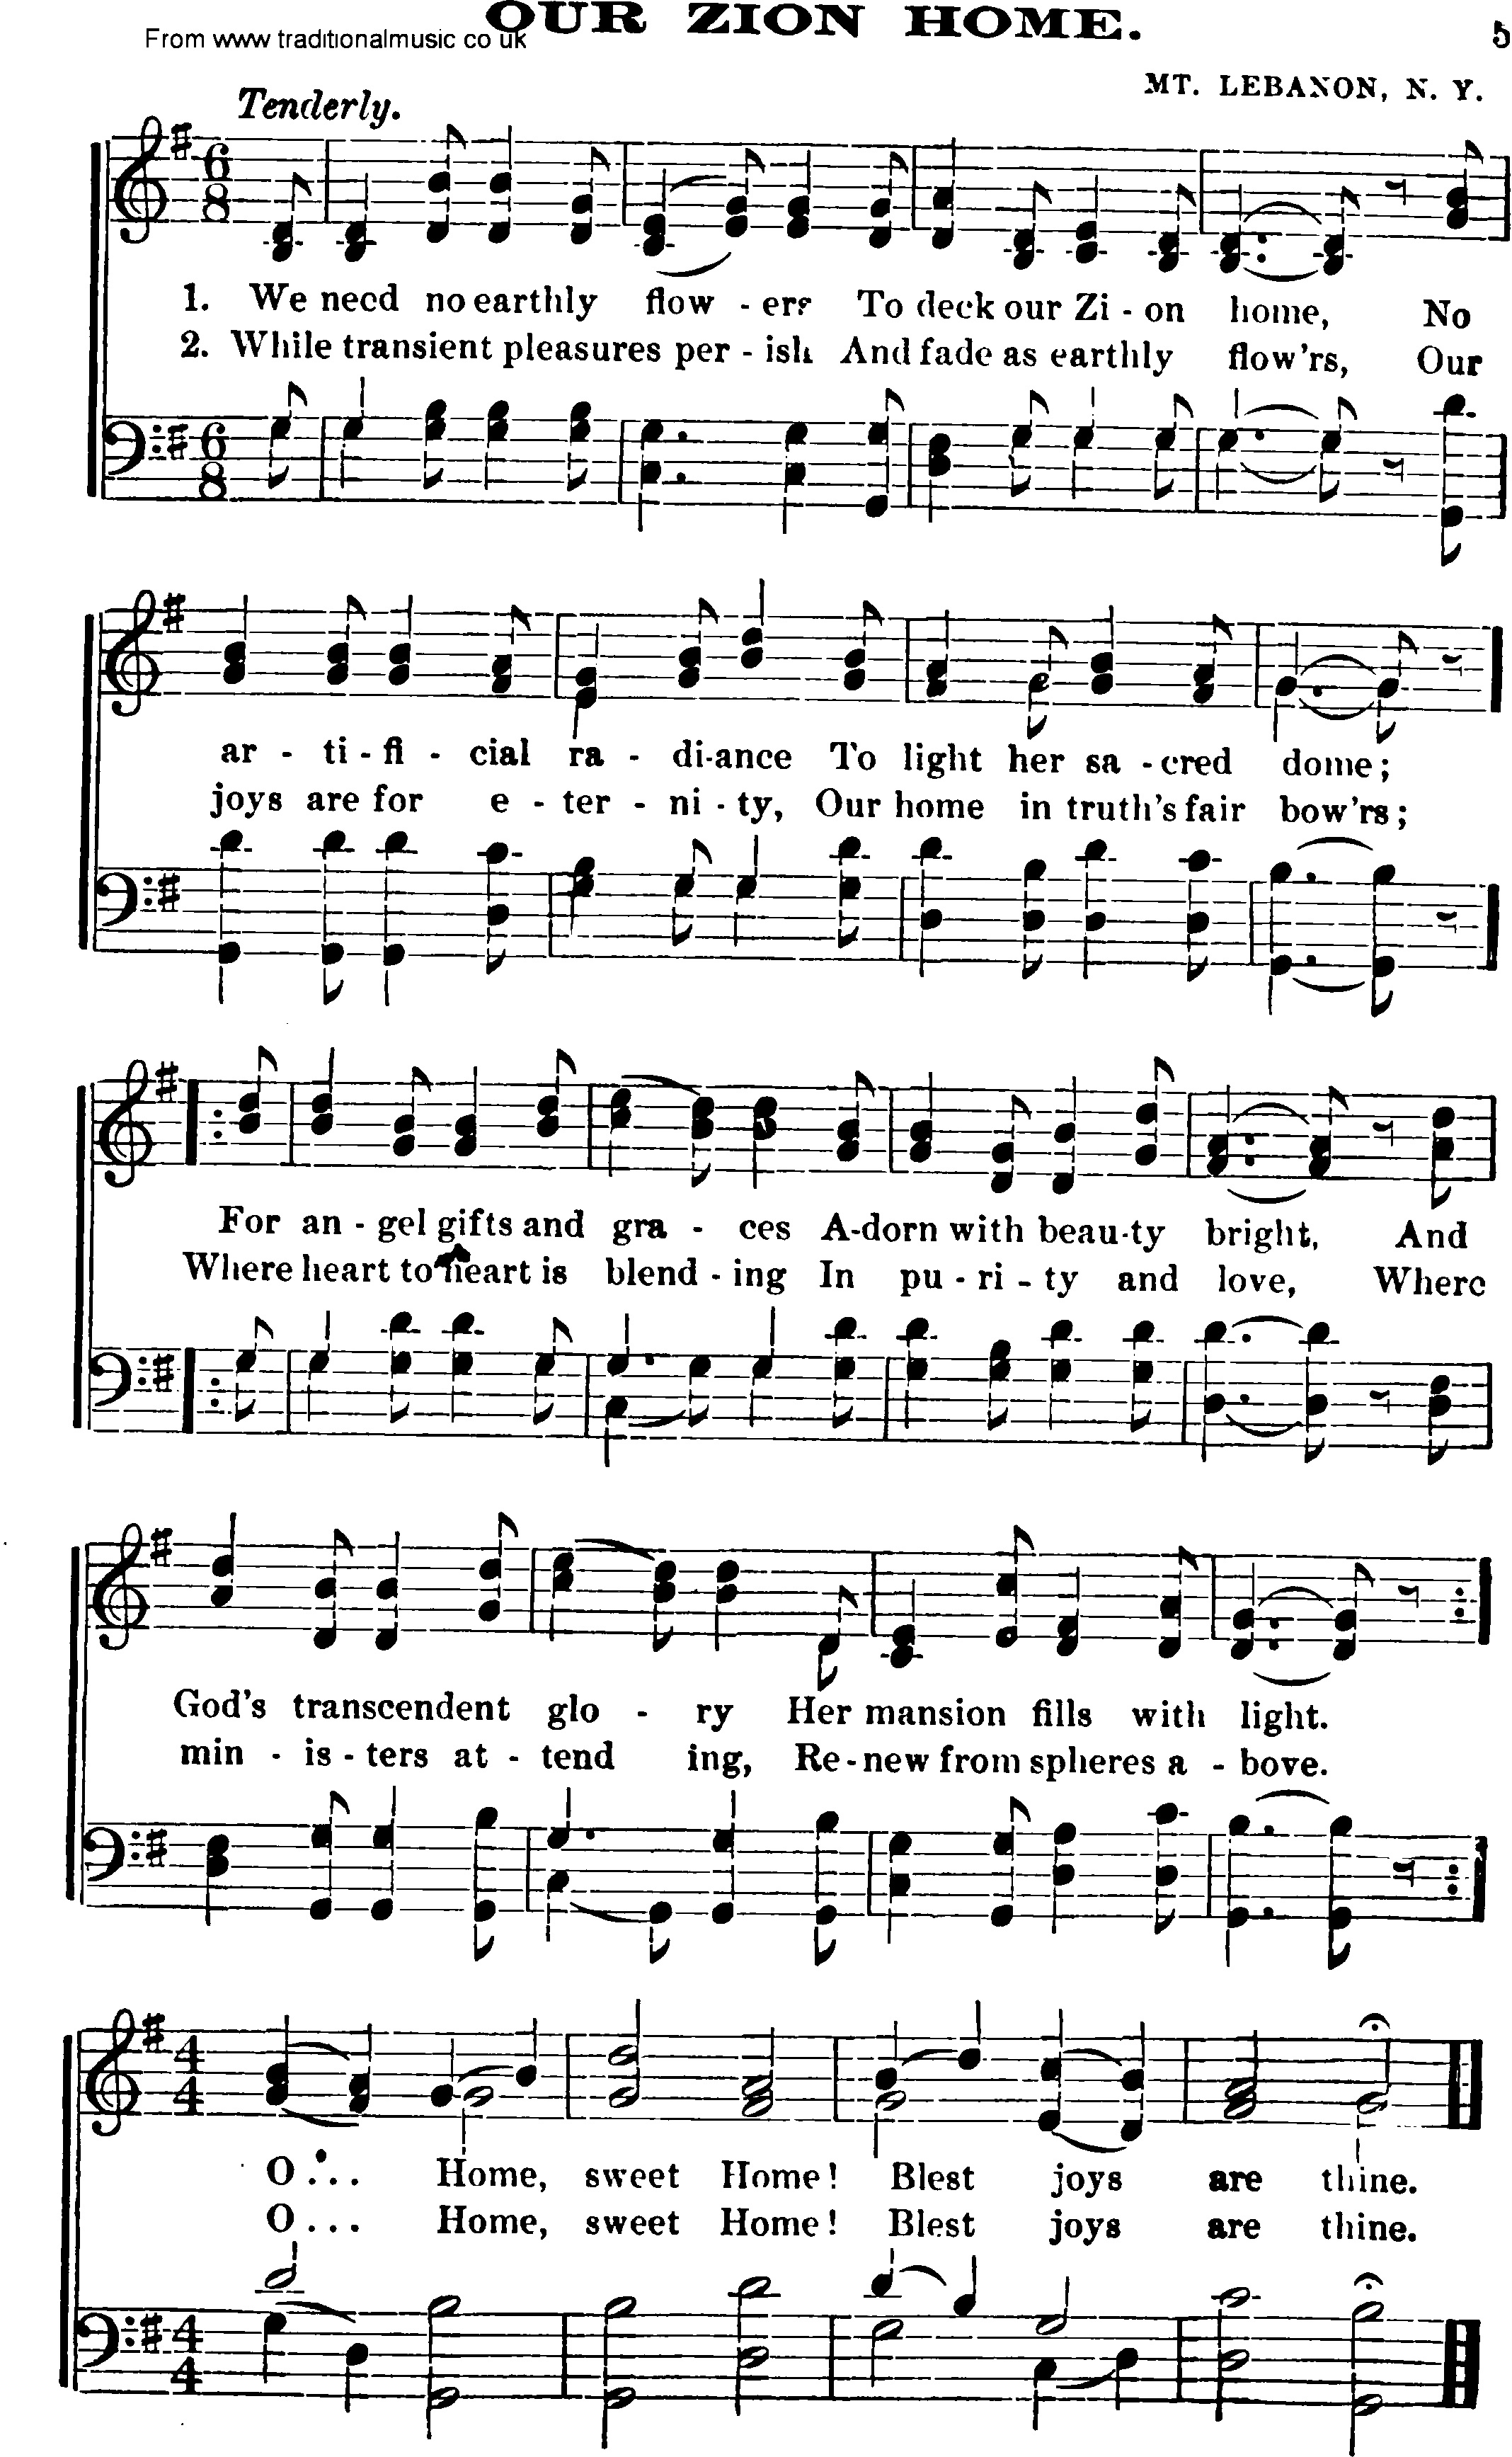 Shaker Music collection, Hymn: Our Zion Home, sheetmusic and PDF